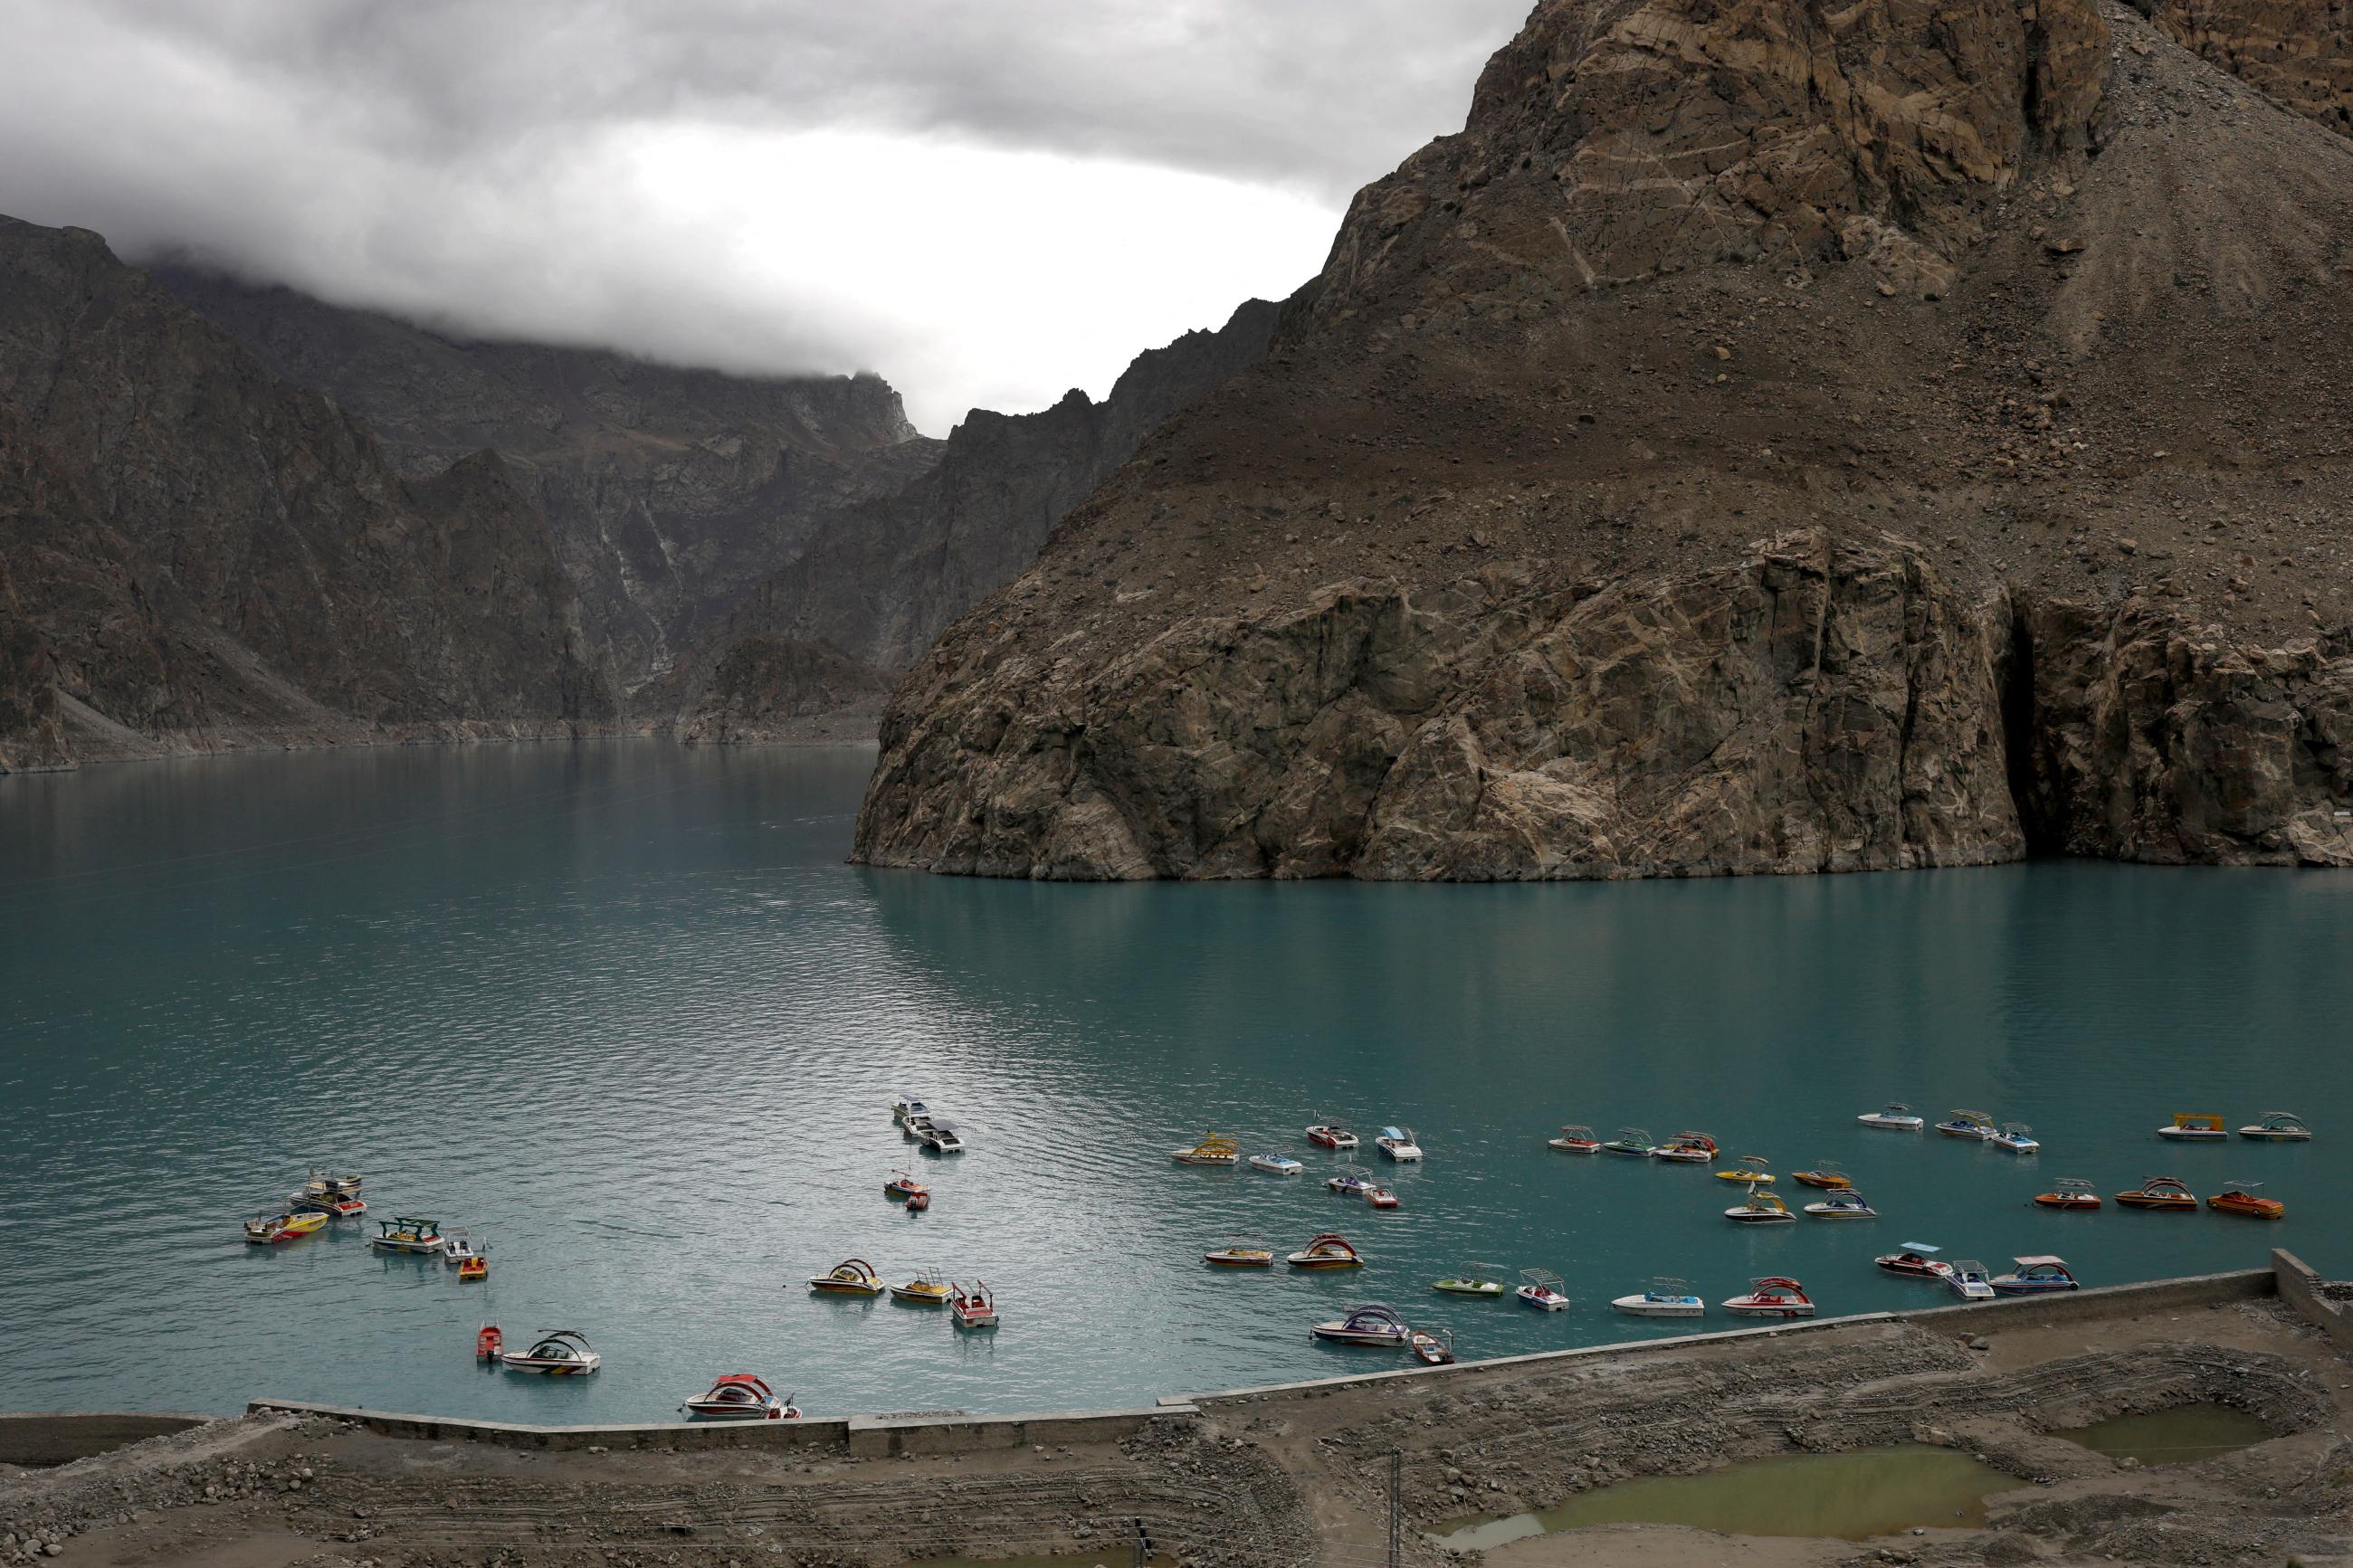 Boats gather on Attabad lake, which was formed due to a landslide in Attabad, in the Karakoram mountain range in the Gilgit-Baltistan region of Pakistan, October 8, 2023. Fifteen million people worldwide are at risk of glacial lake flooding, with 2 million of them in Pakistan